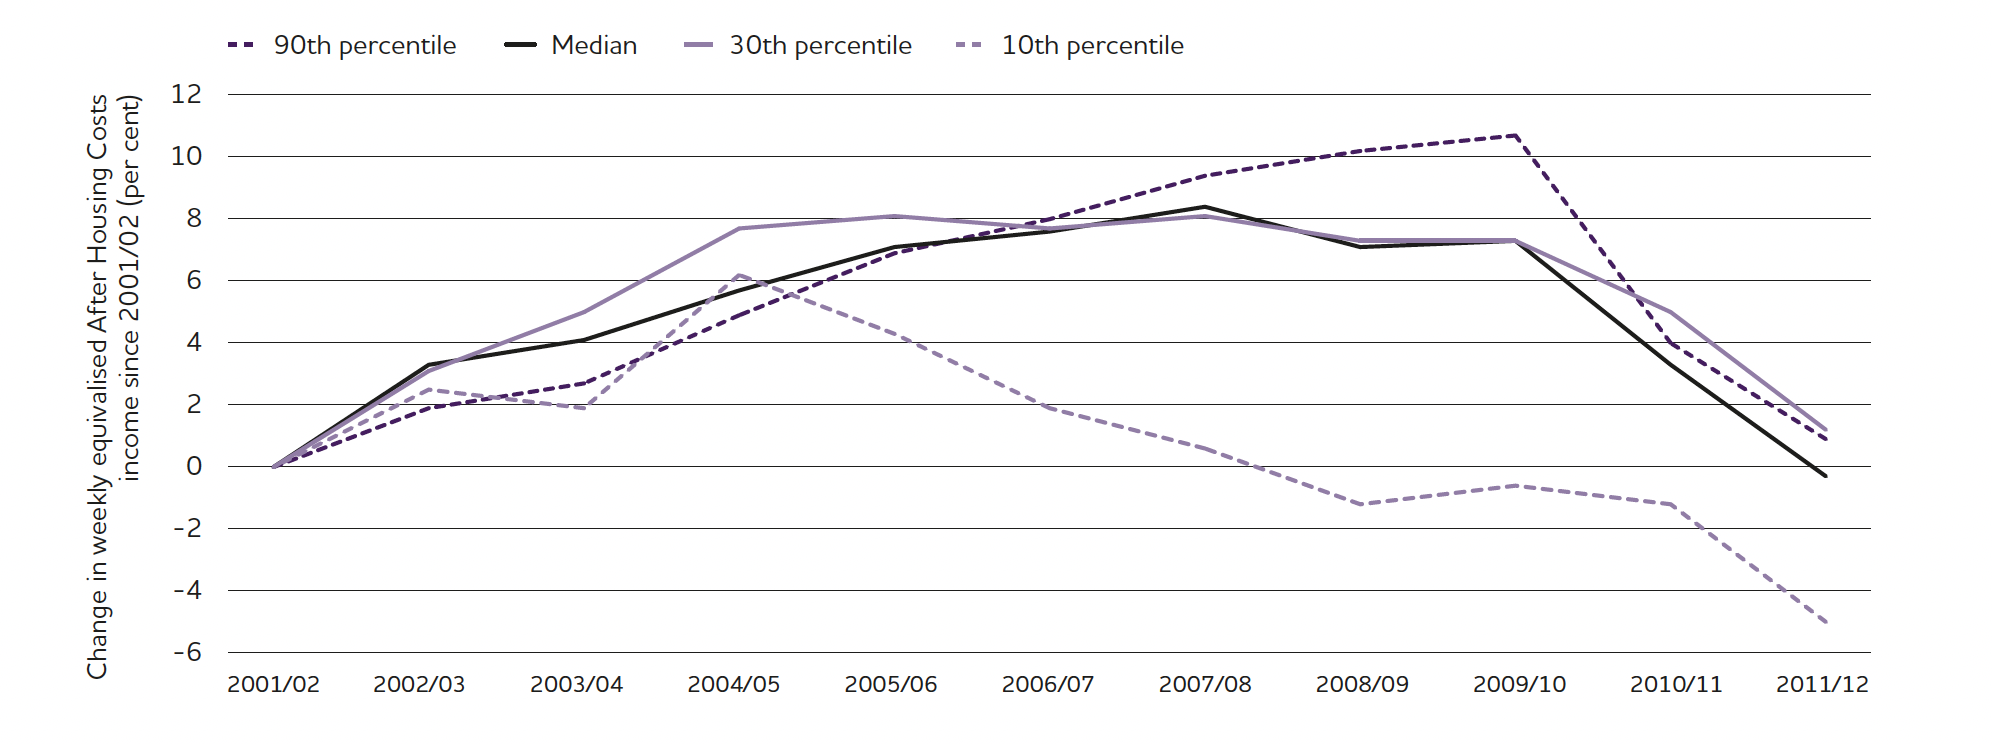 Change in incomes since 2001/02.